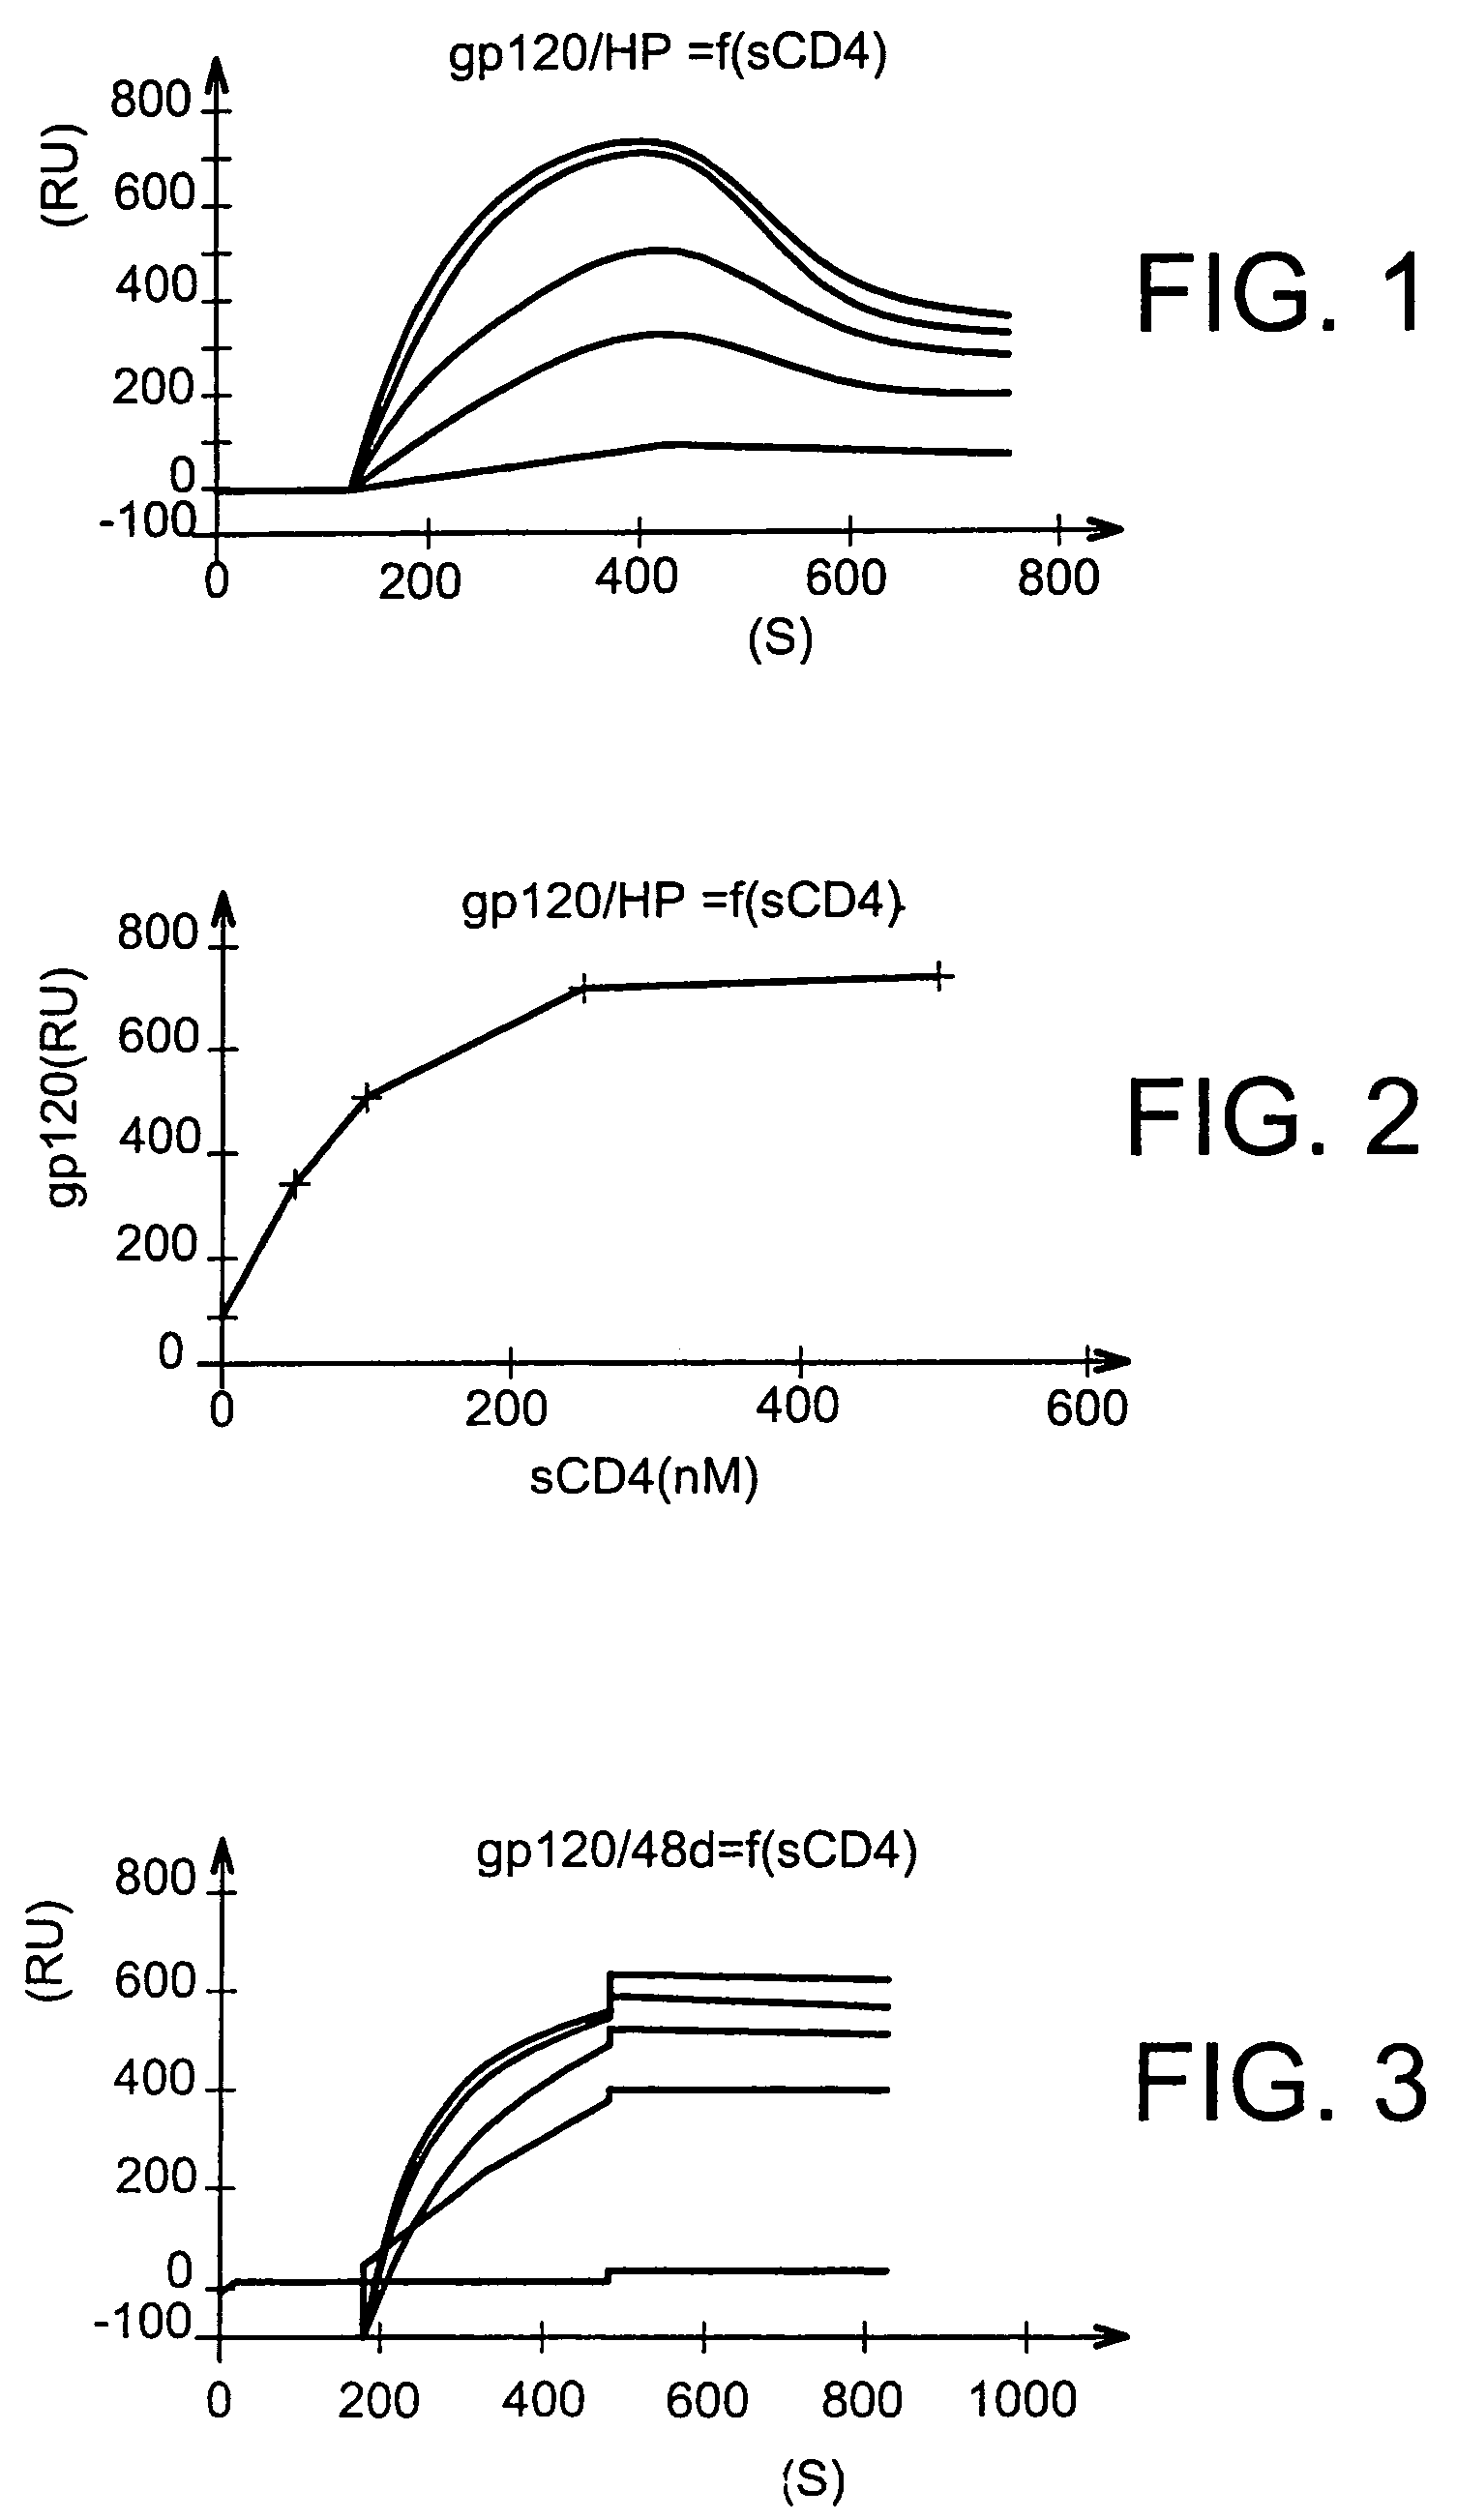 Anti-HIV composition, production method thereof and medicament